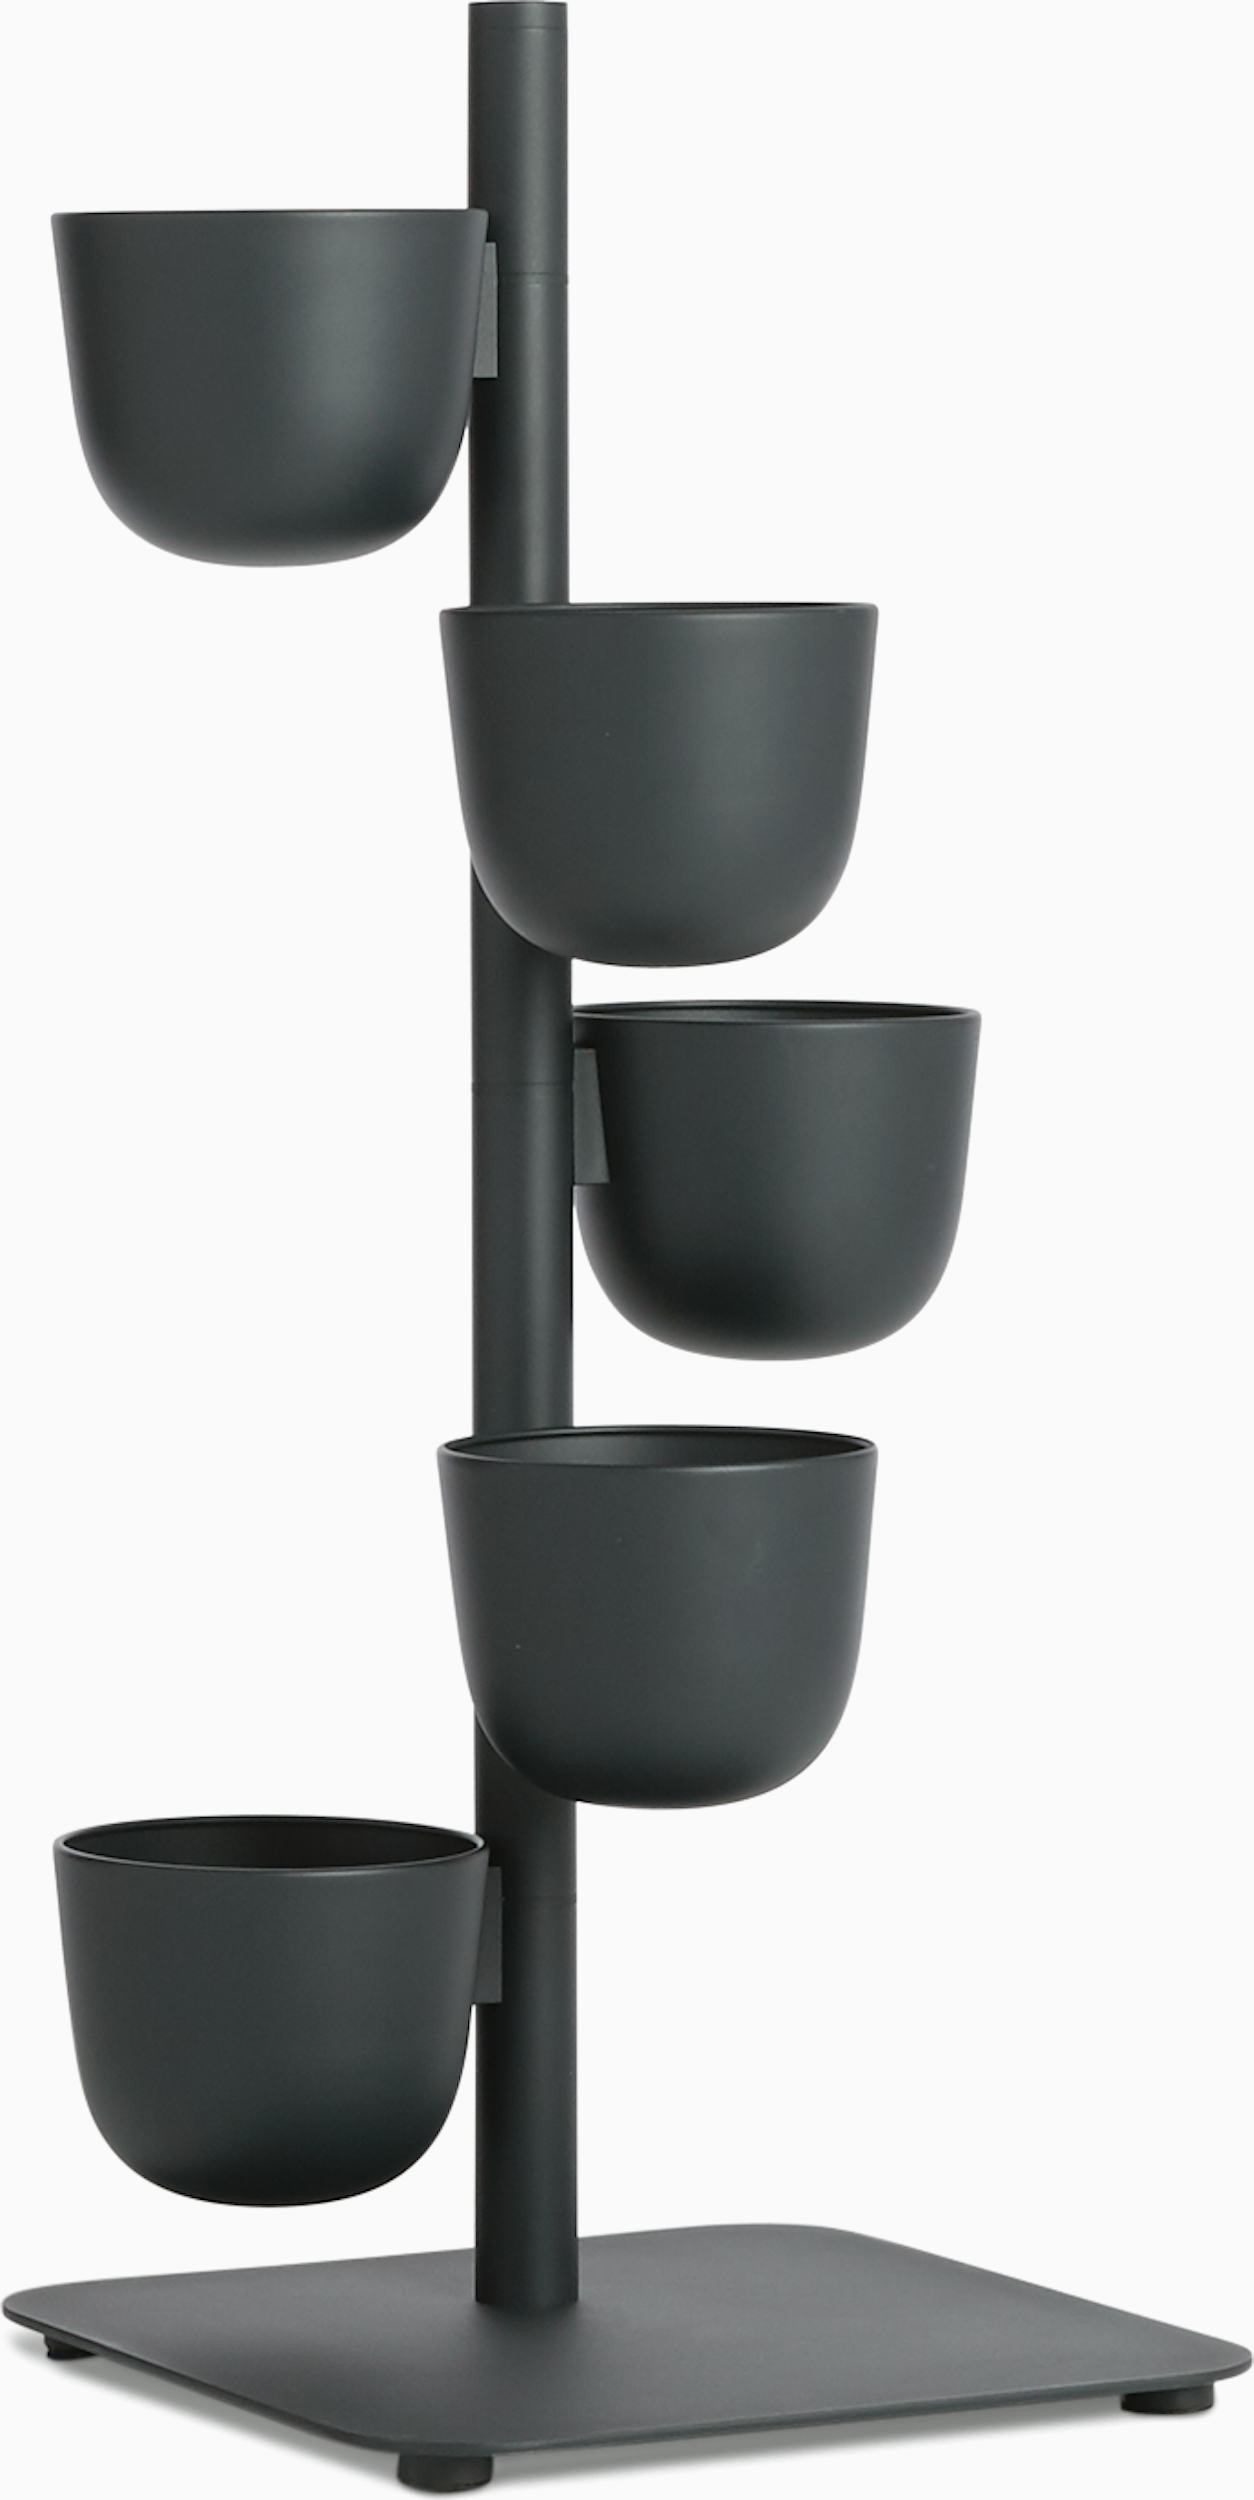 Buy online Toronto M Planter with Metal Stand - A planter with